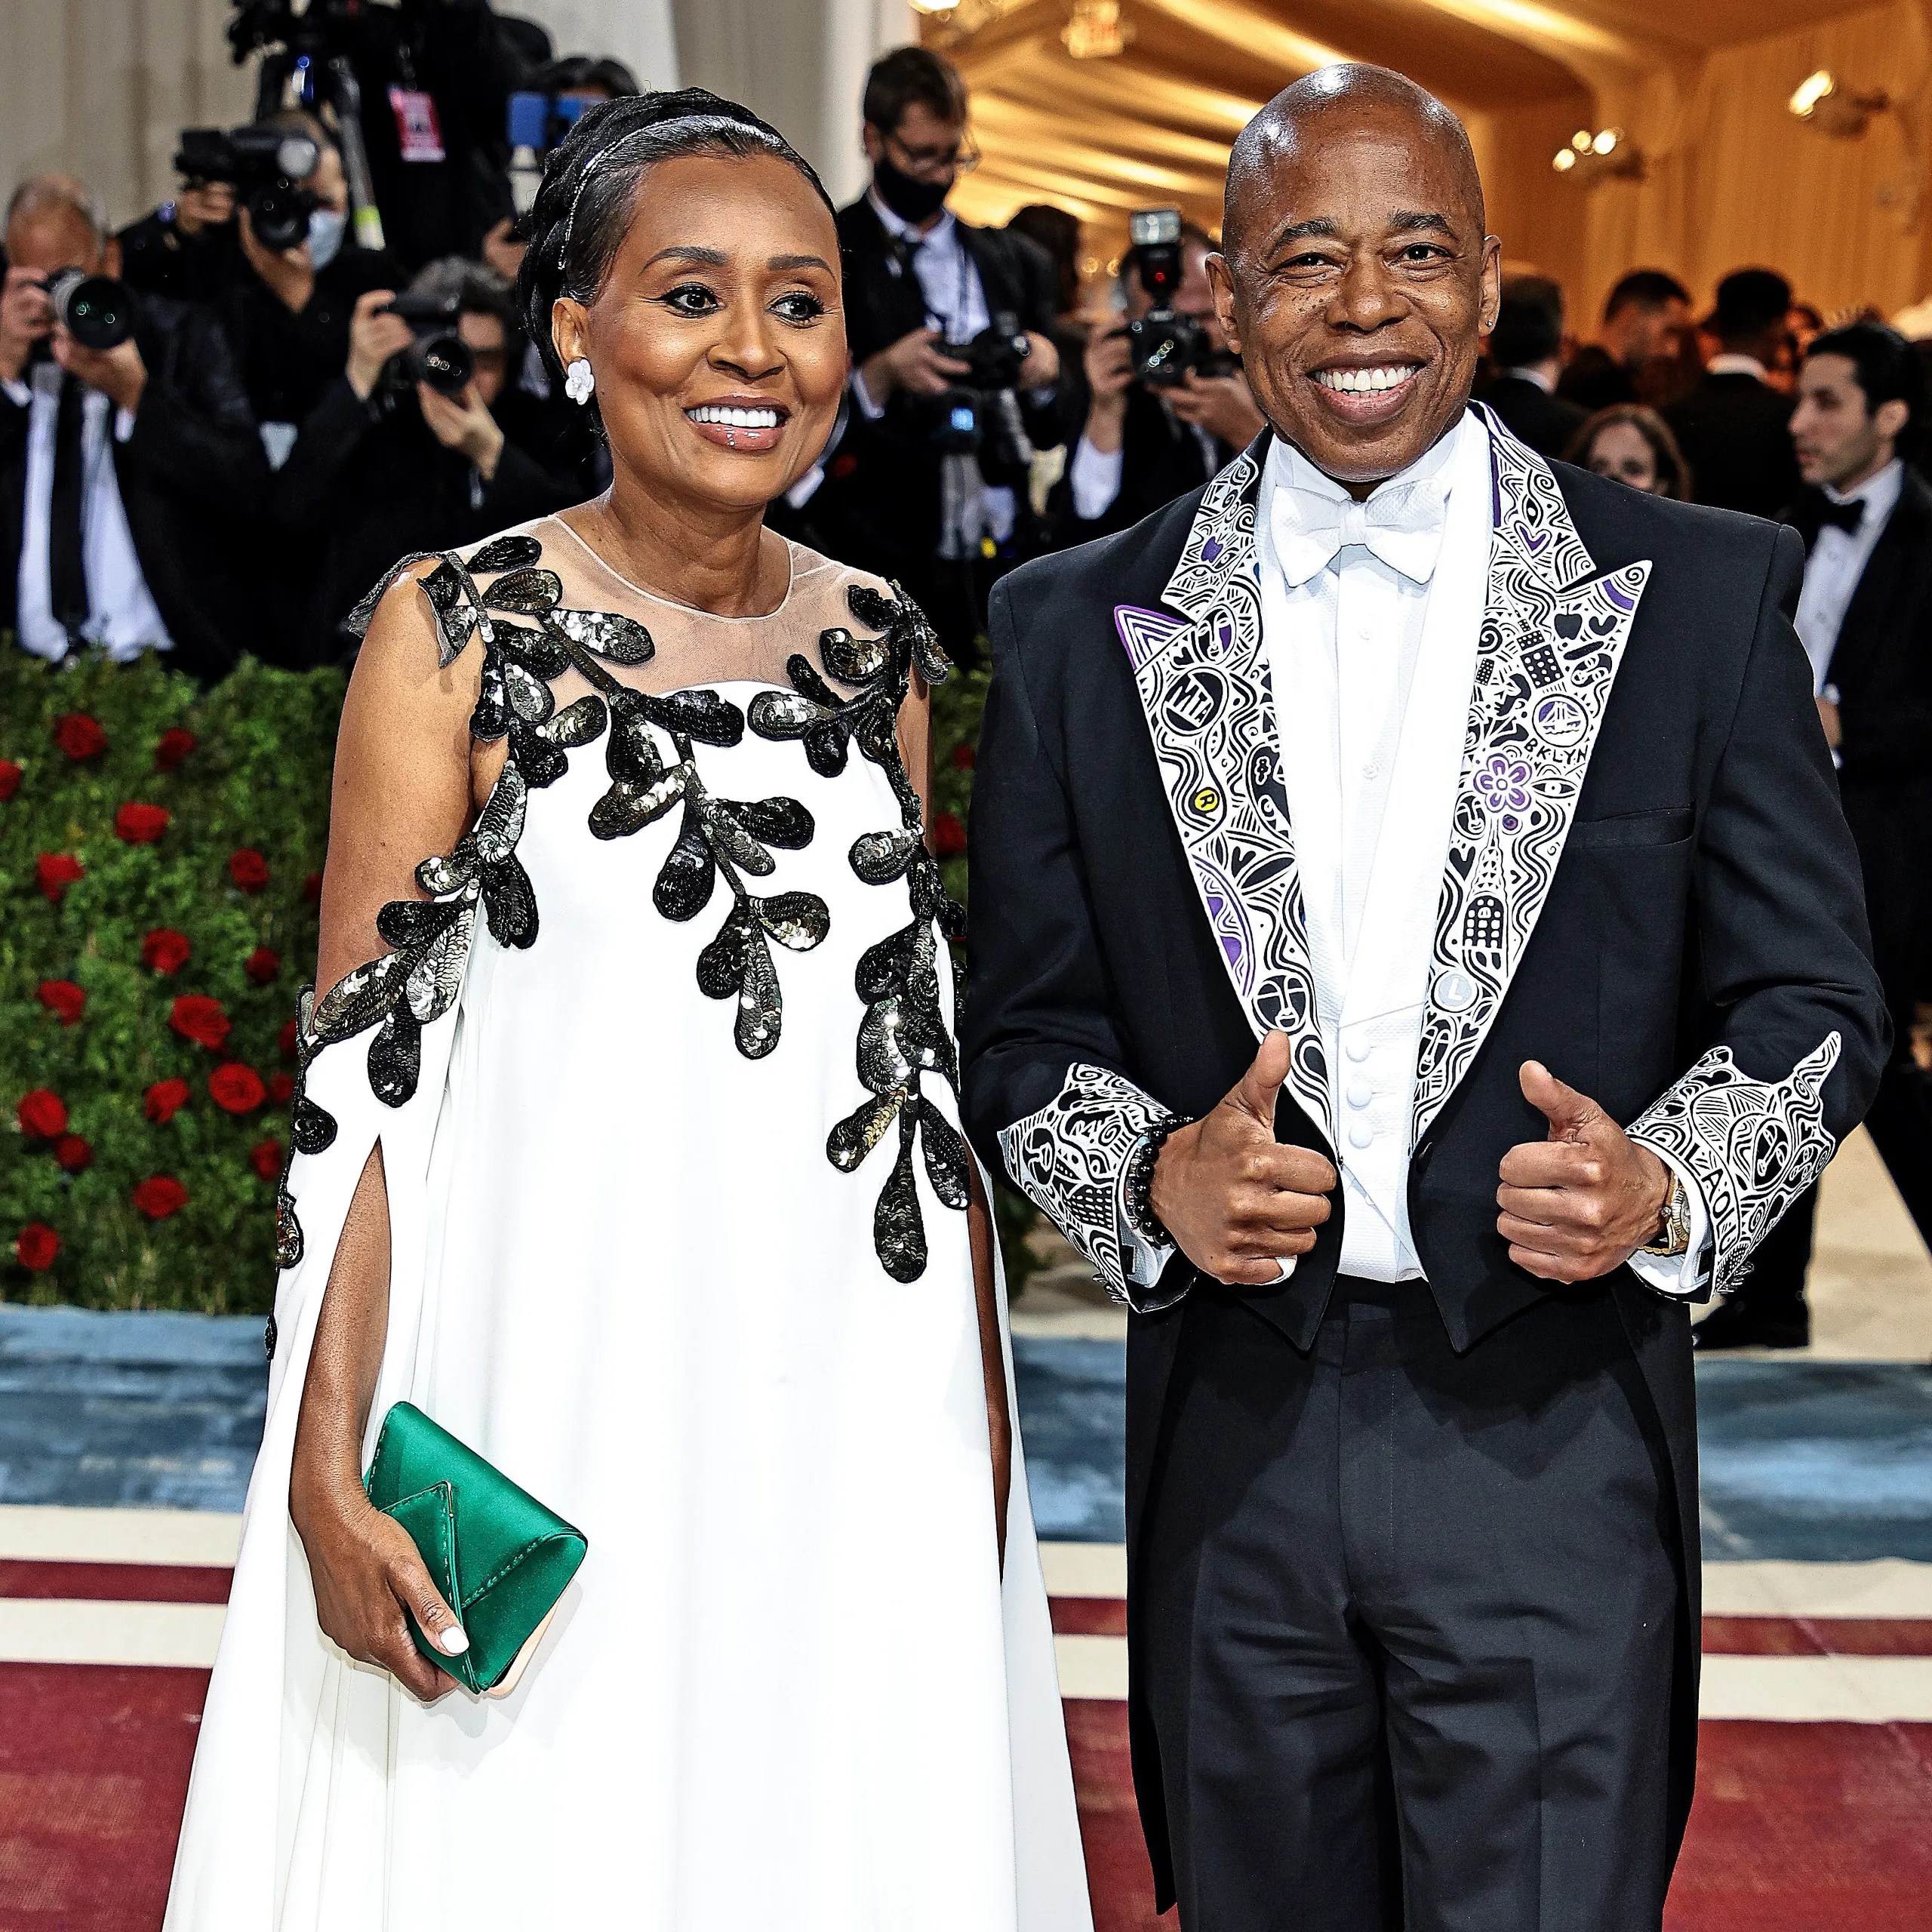 New York Mayor Eric Adams Made a Strong Statement on the Met Gala Red